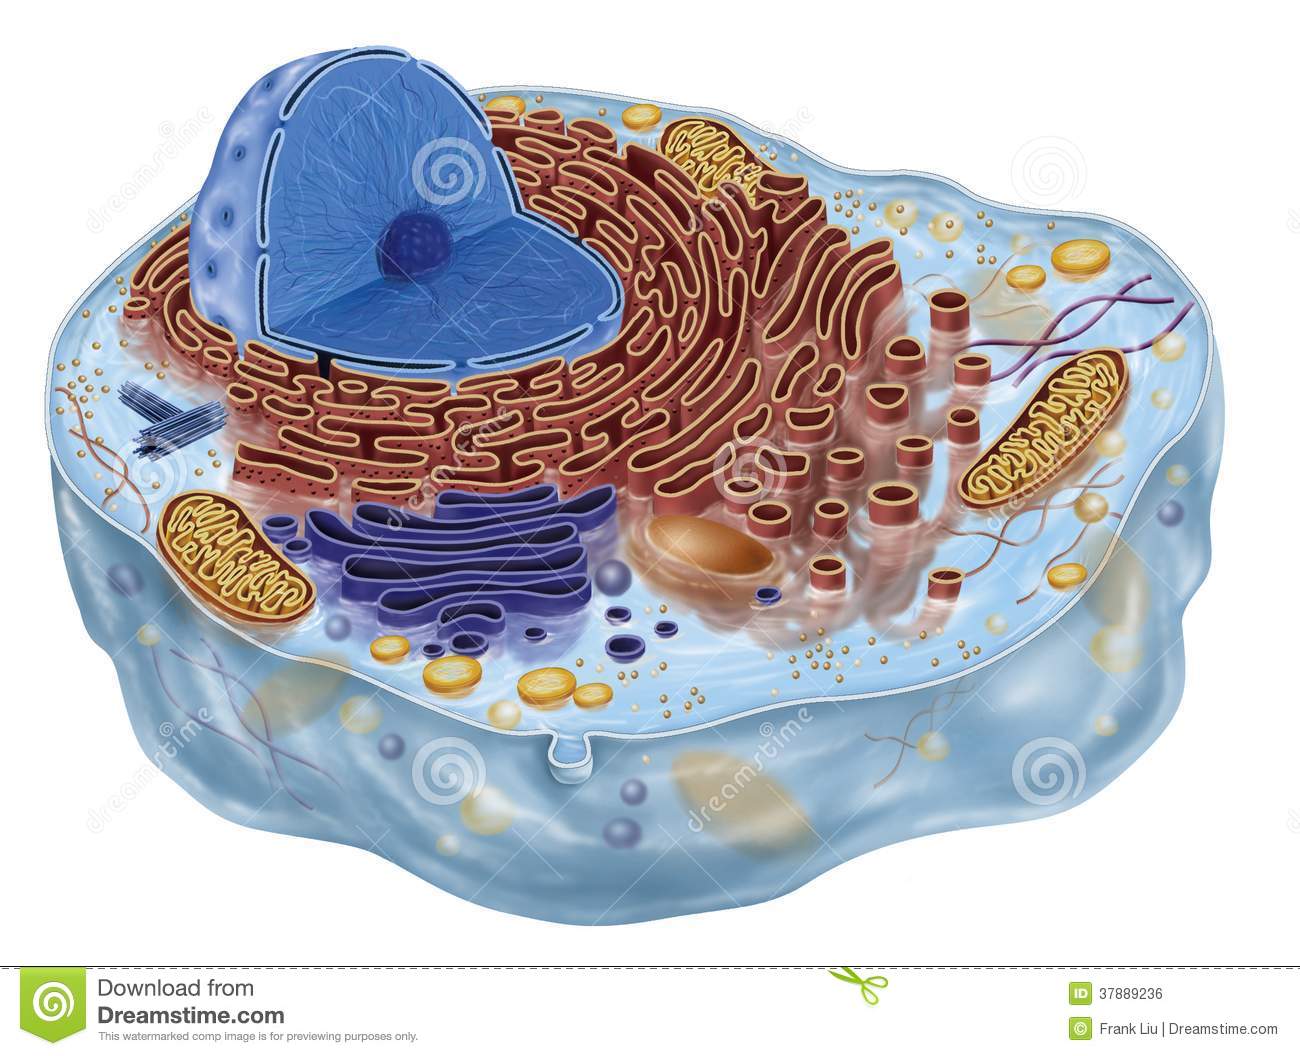 Animal Cell Royalty Free Stock Image   Image  37889236